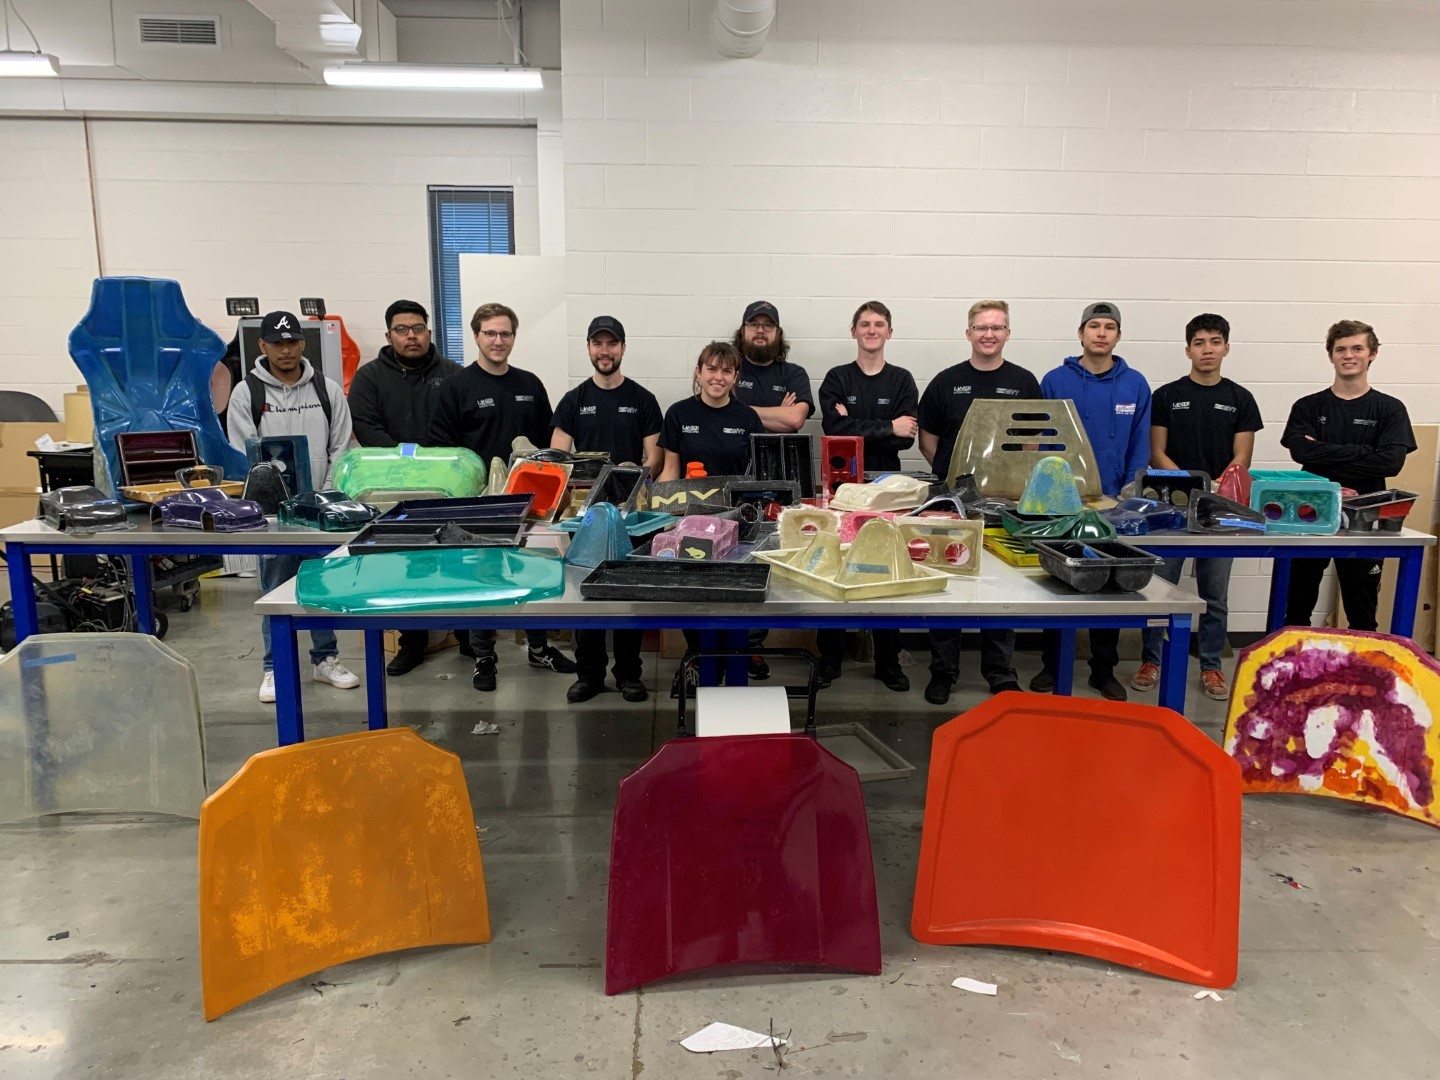 Motorsports Vehicle Technology Program students in Composites class